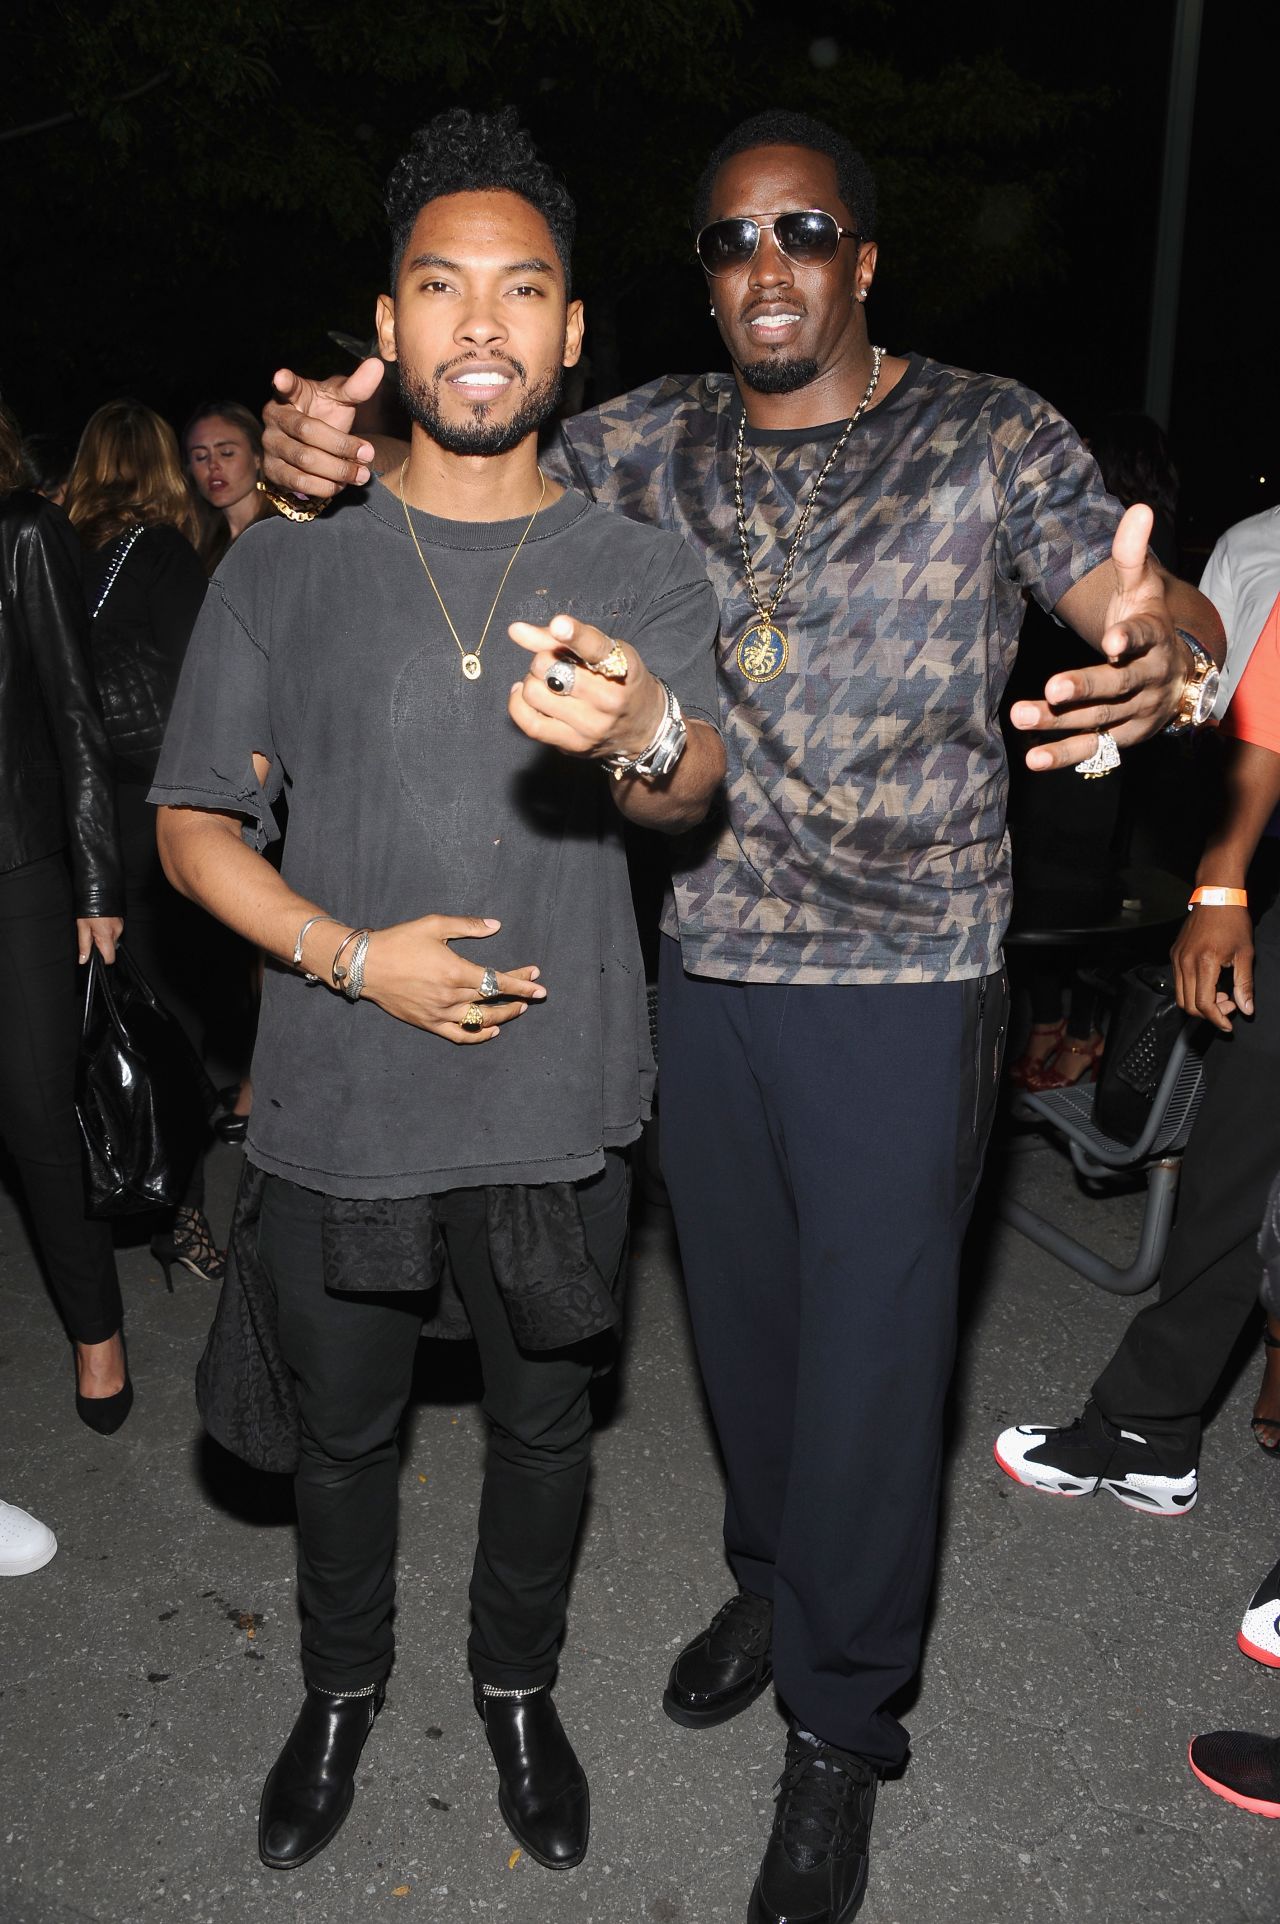 Miguel and P. Diddy have a bonding moment at Janelle Monae's release party on September 9. 